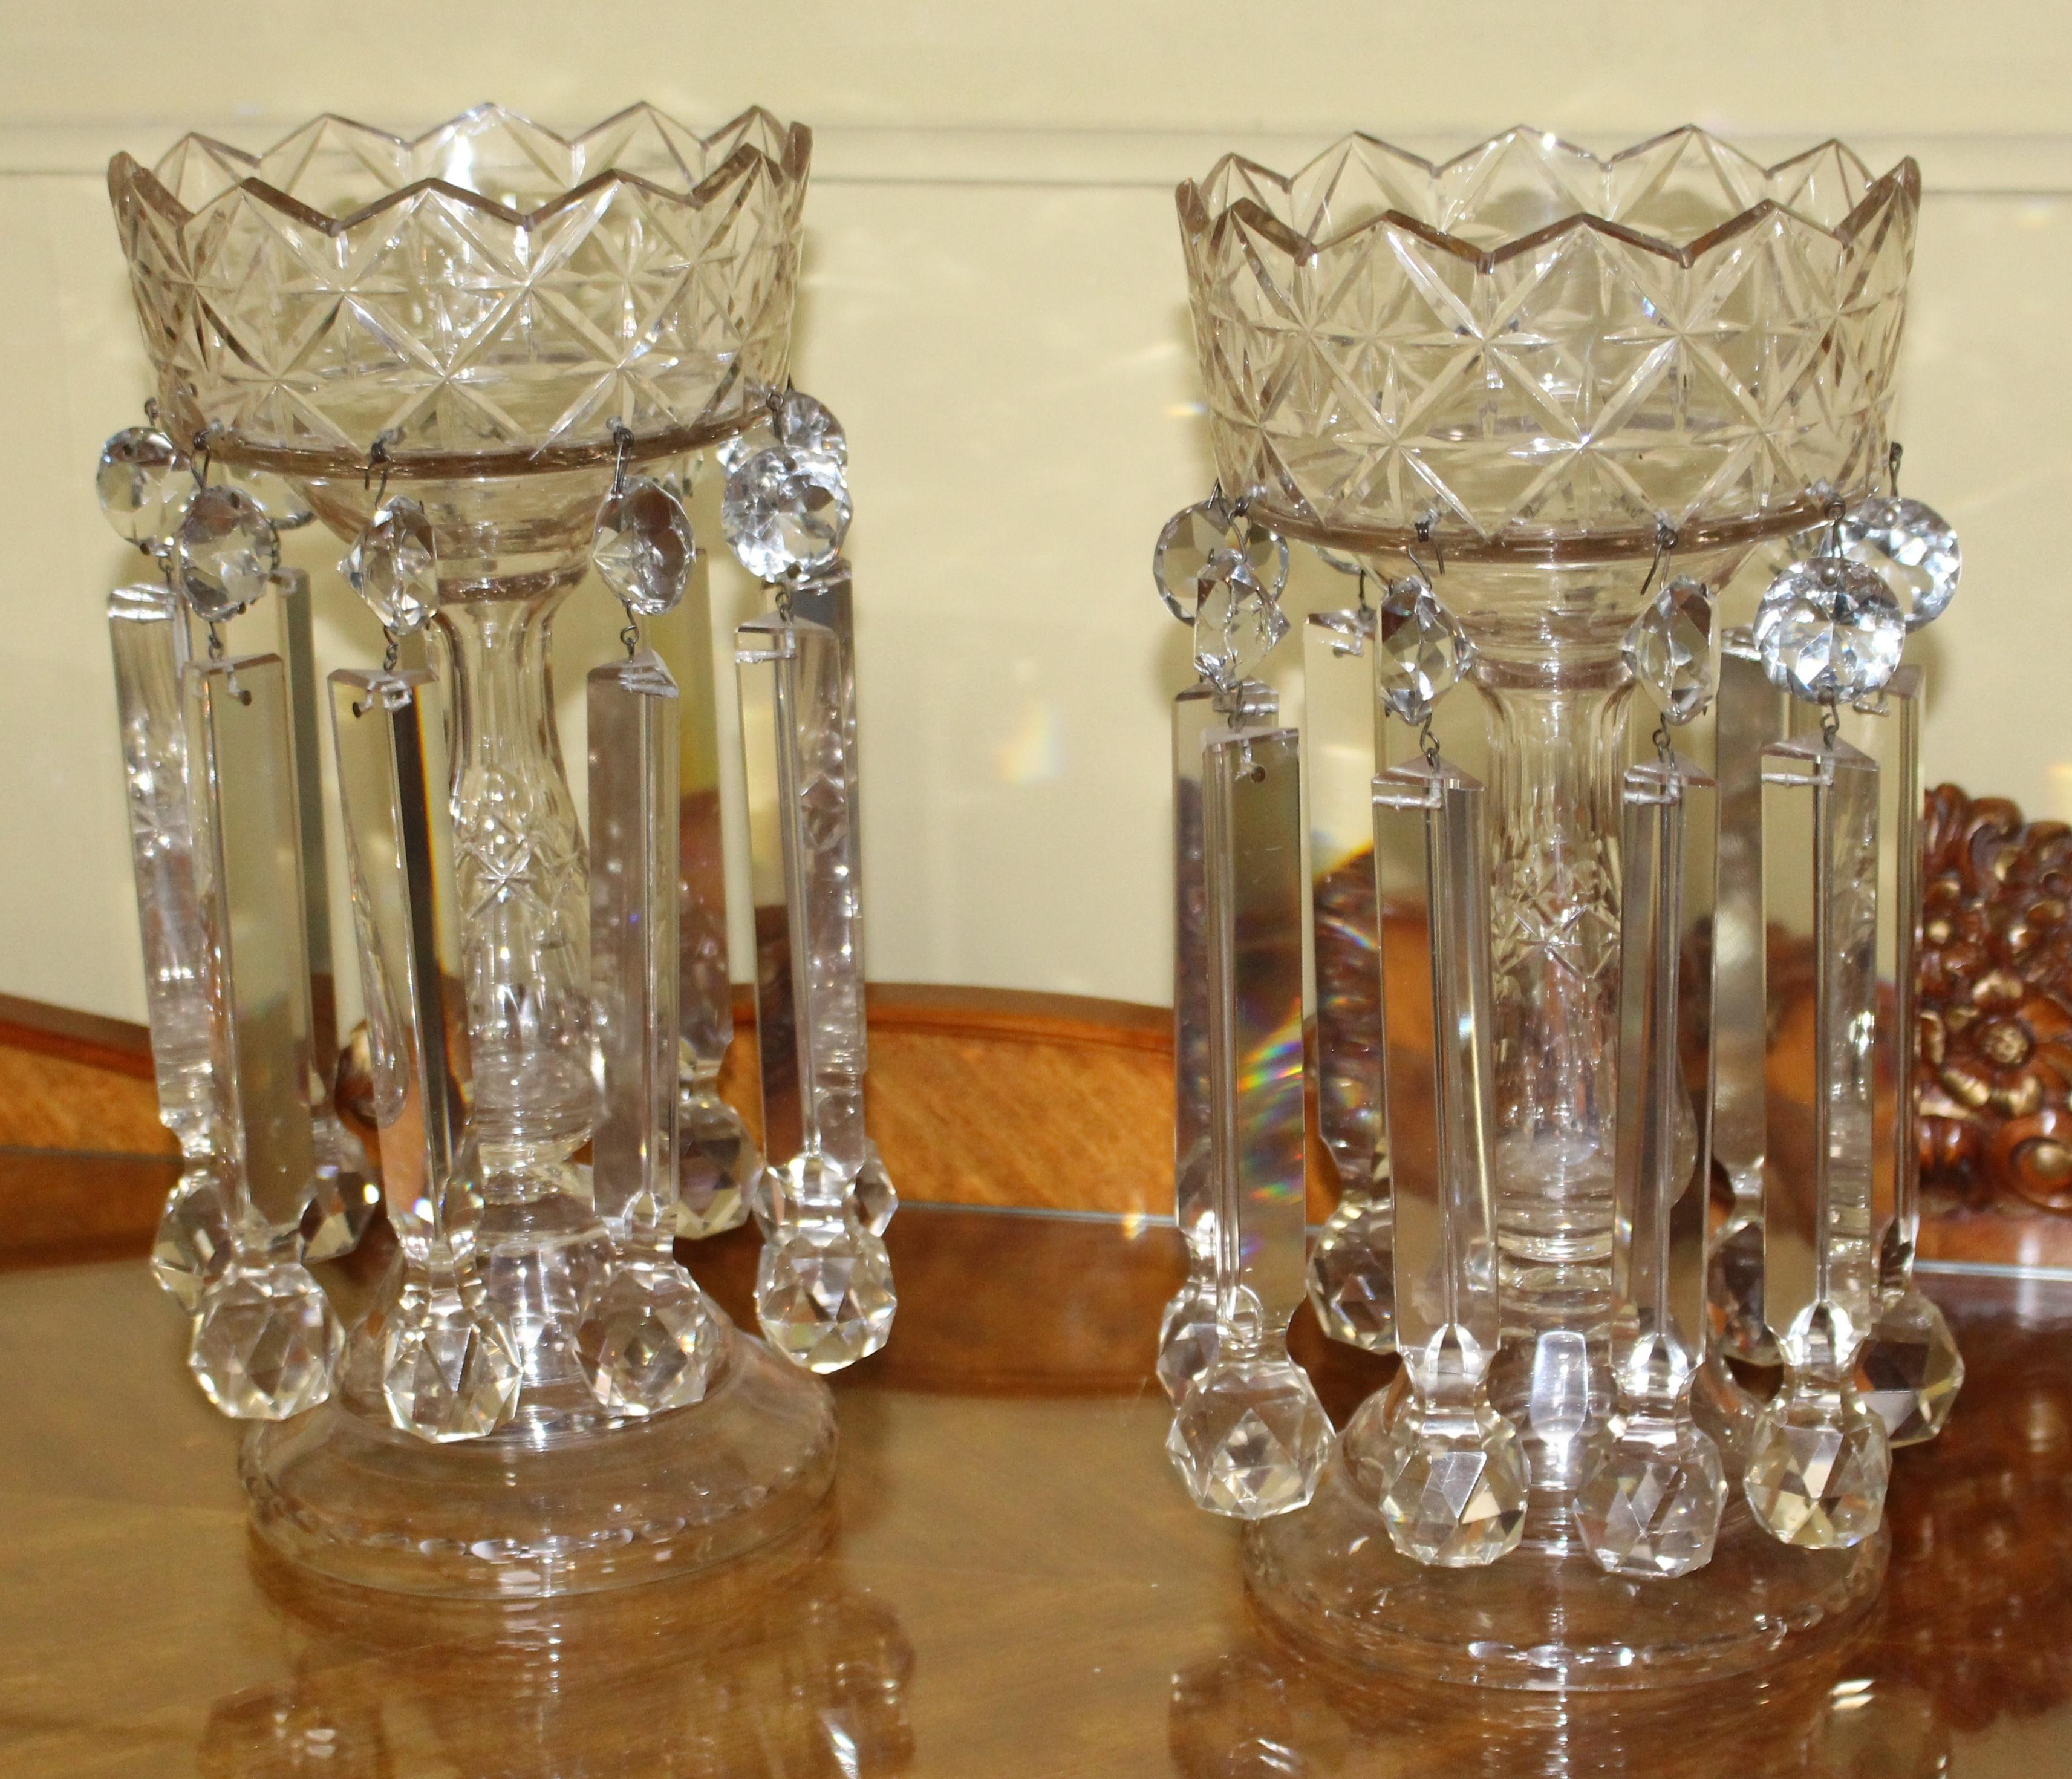 Pair of heavy Georgian cut glass Lustres


English, early 19th century

Cut glass crystal

Measures: Height: 34 cm / 13 1/2 in

Offered in very good condition commensurate with age. One or two minor nibbles to lustres
 

Lovely quality